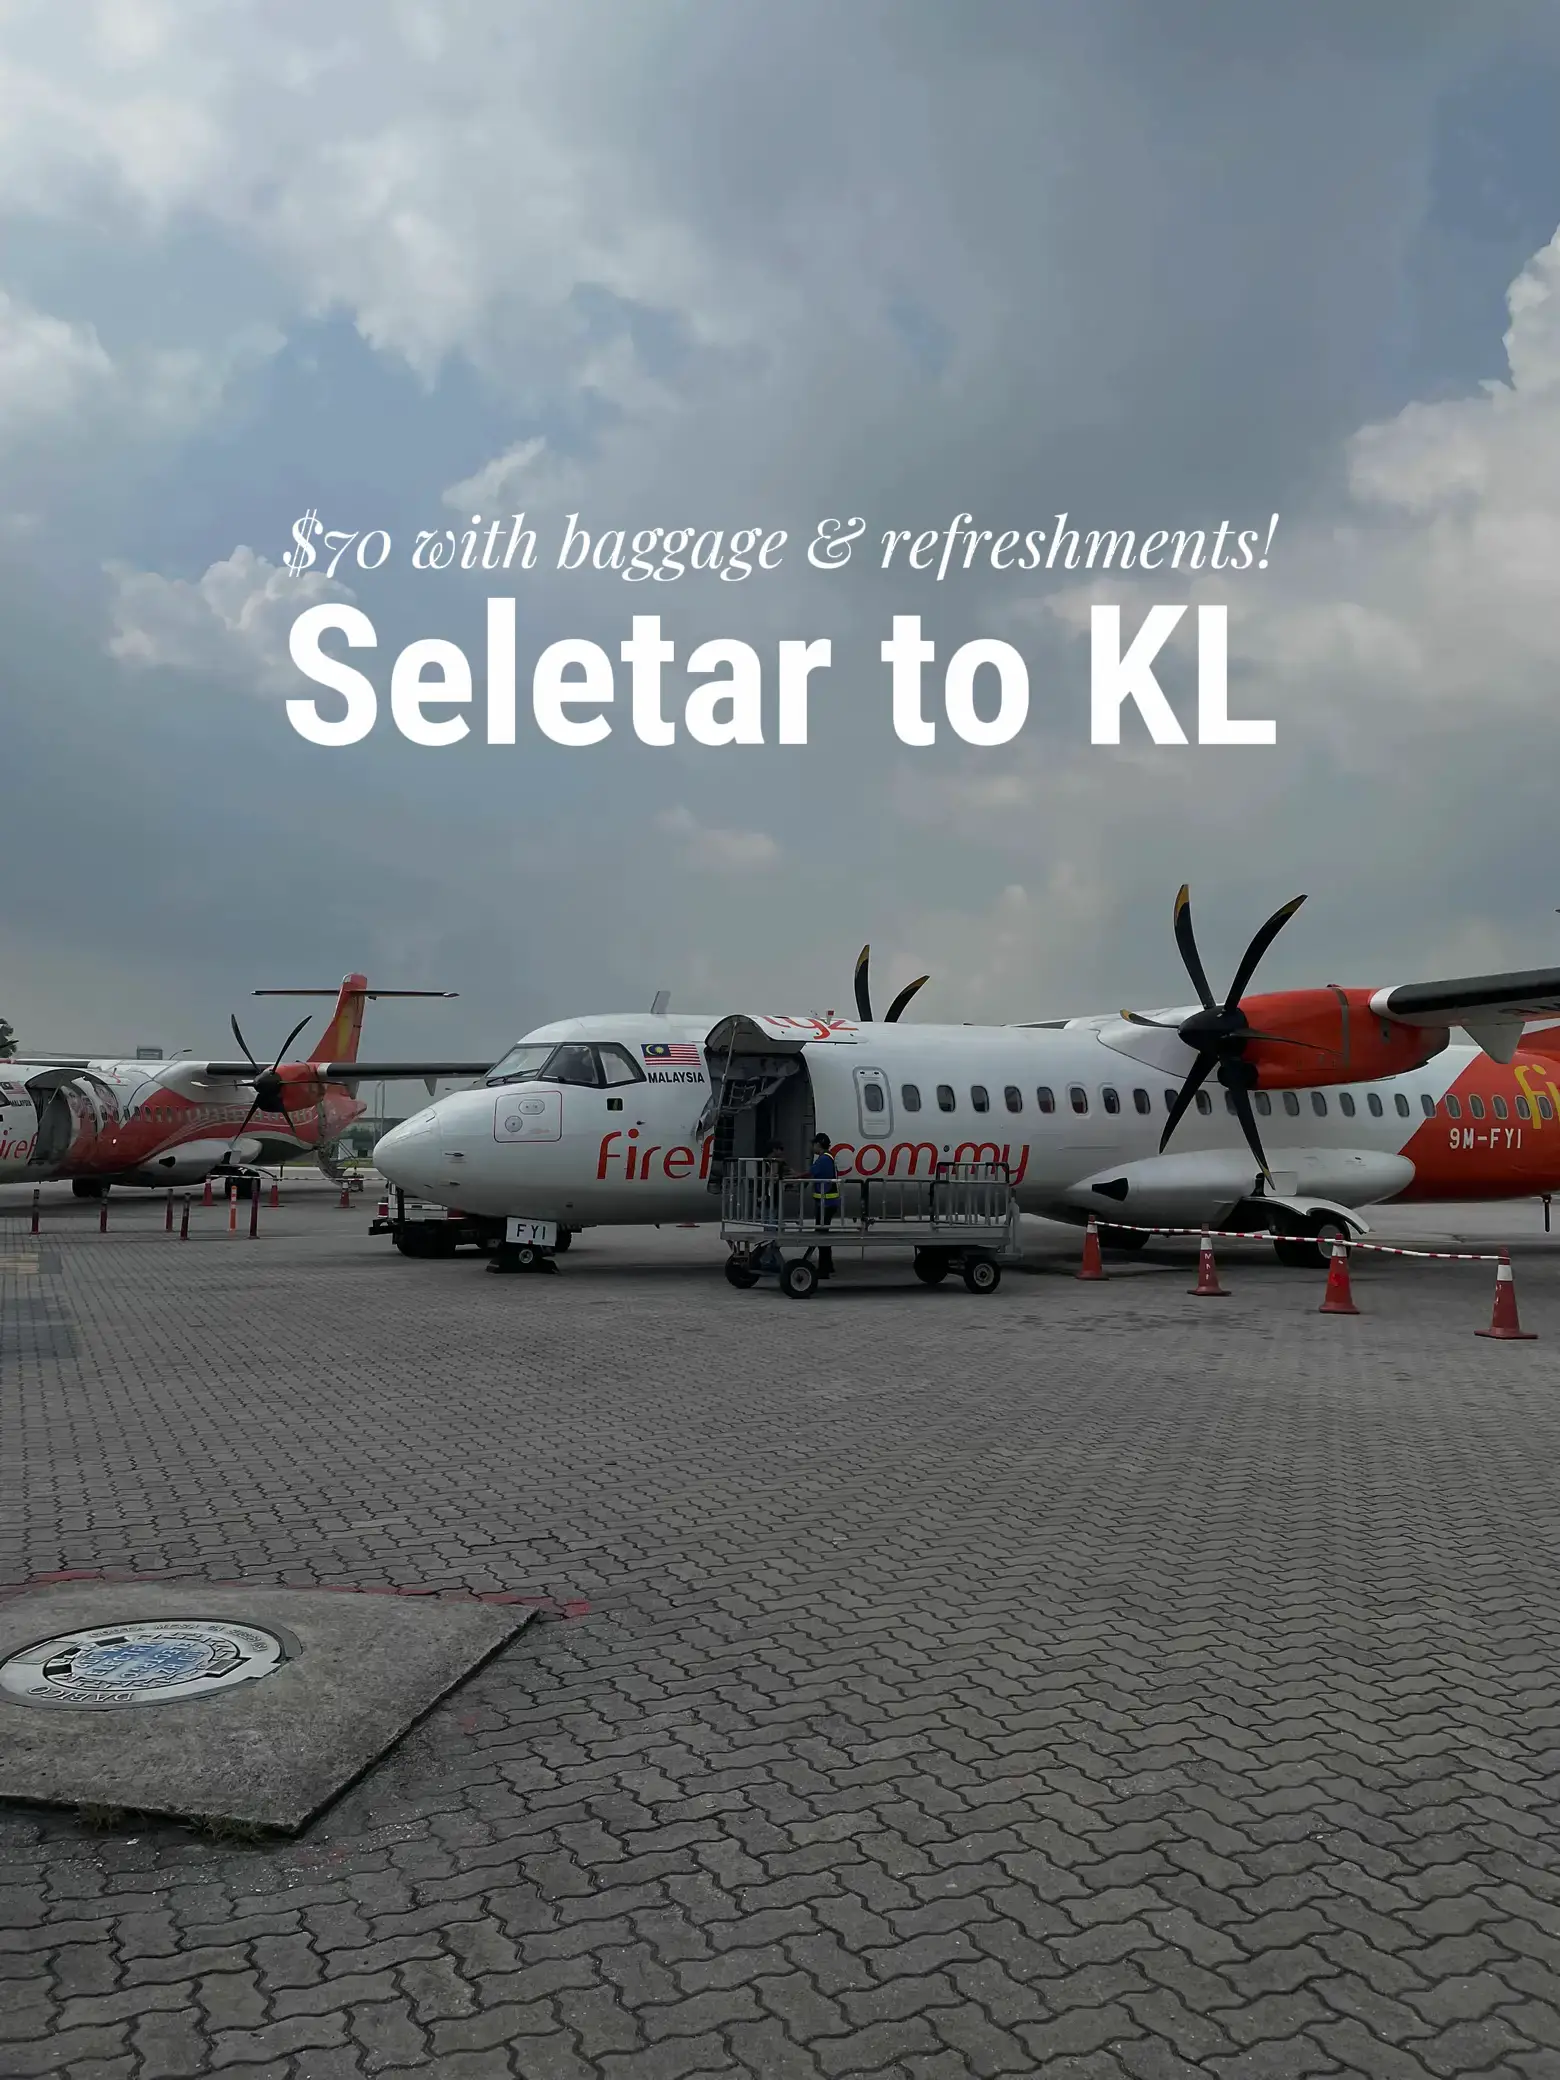 stop flying from Changi! a faster way to get to KL's images(0)